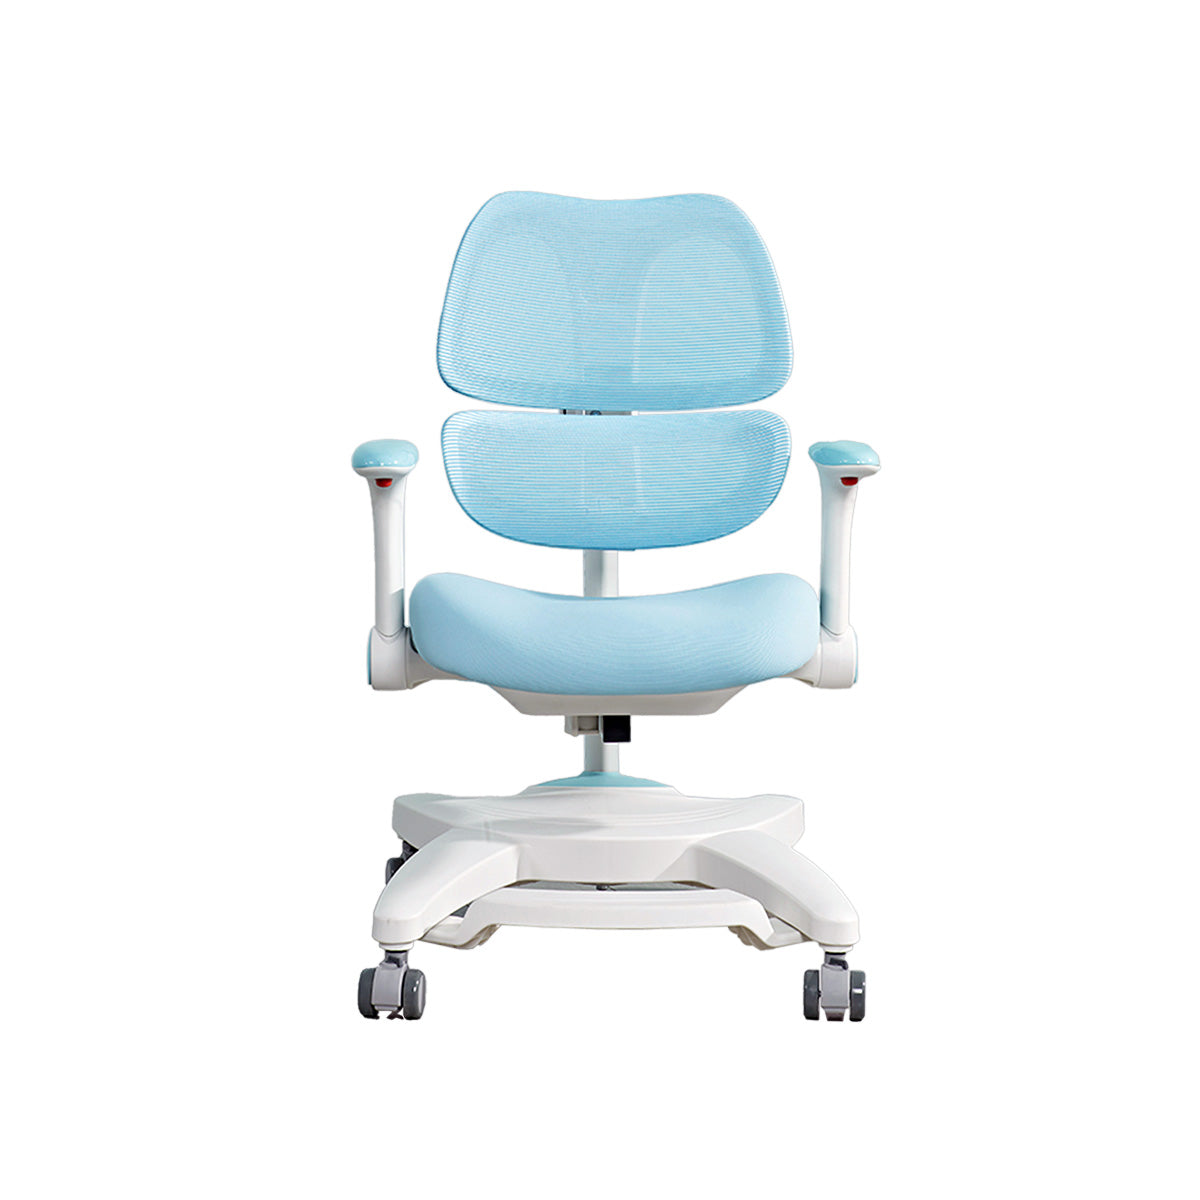 IMPACT Kids Ergonomic Chair With Arm Rest, Blue (Preorder)